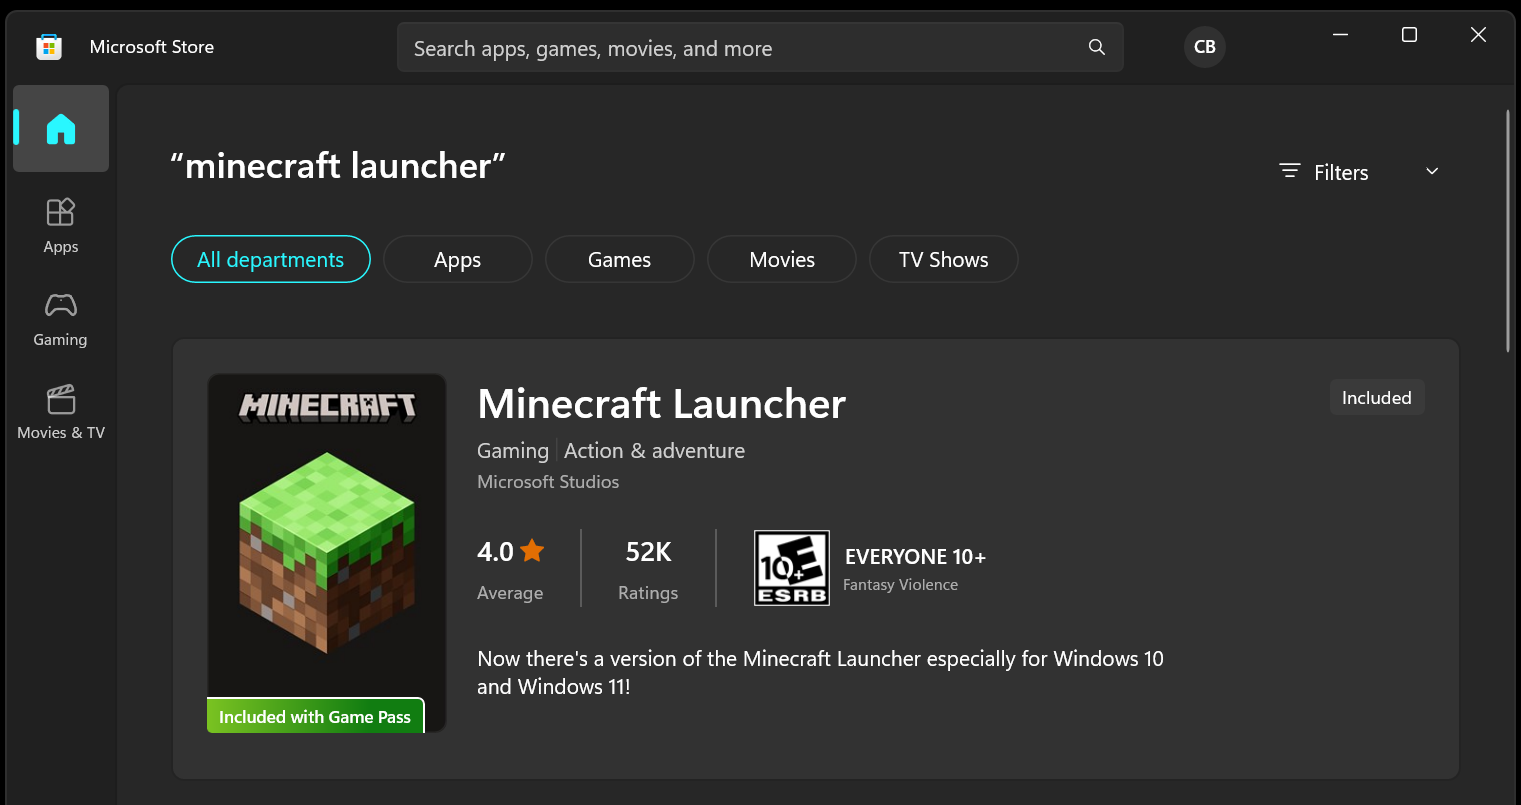 Image of Minecraft Launcher app in the Microsoft Store